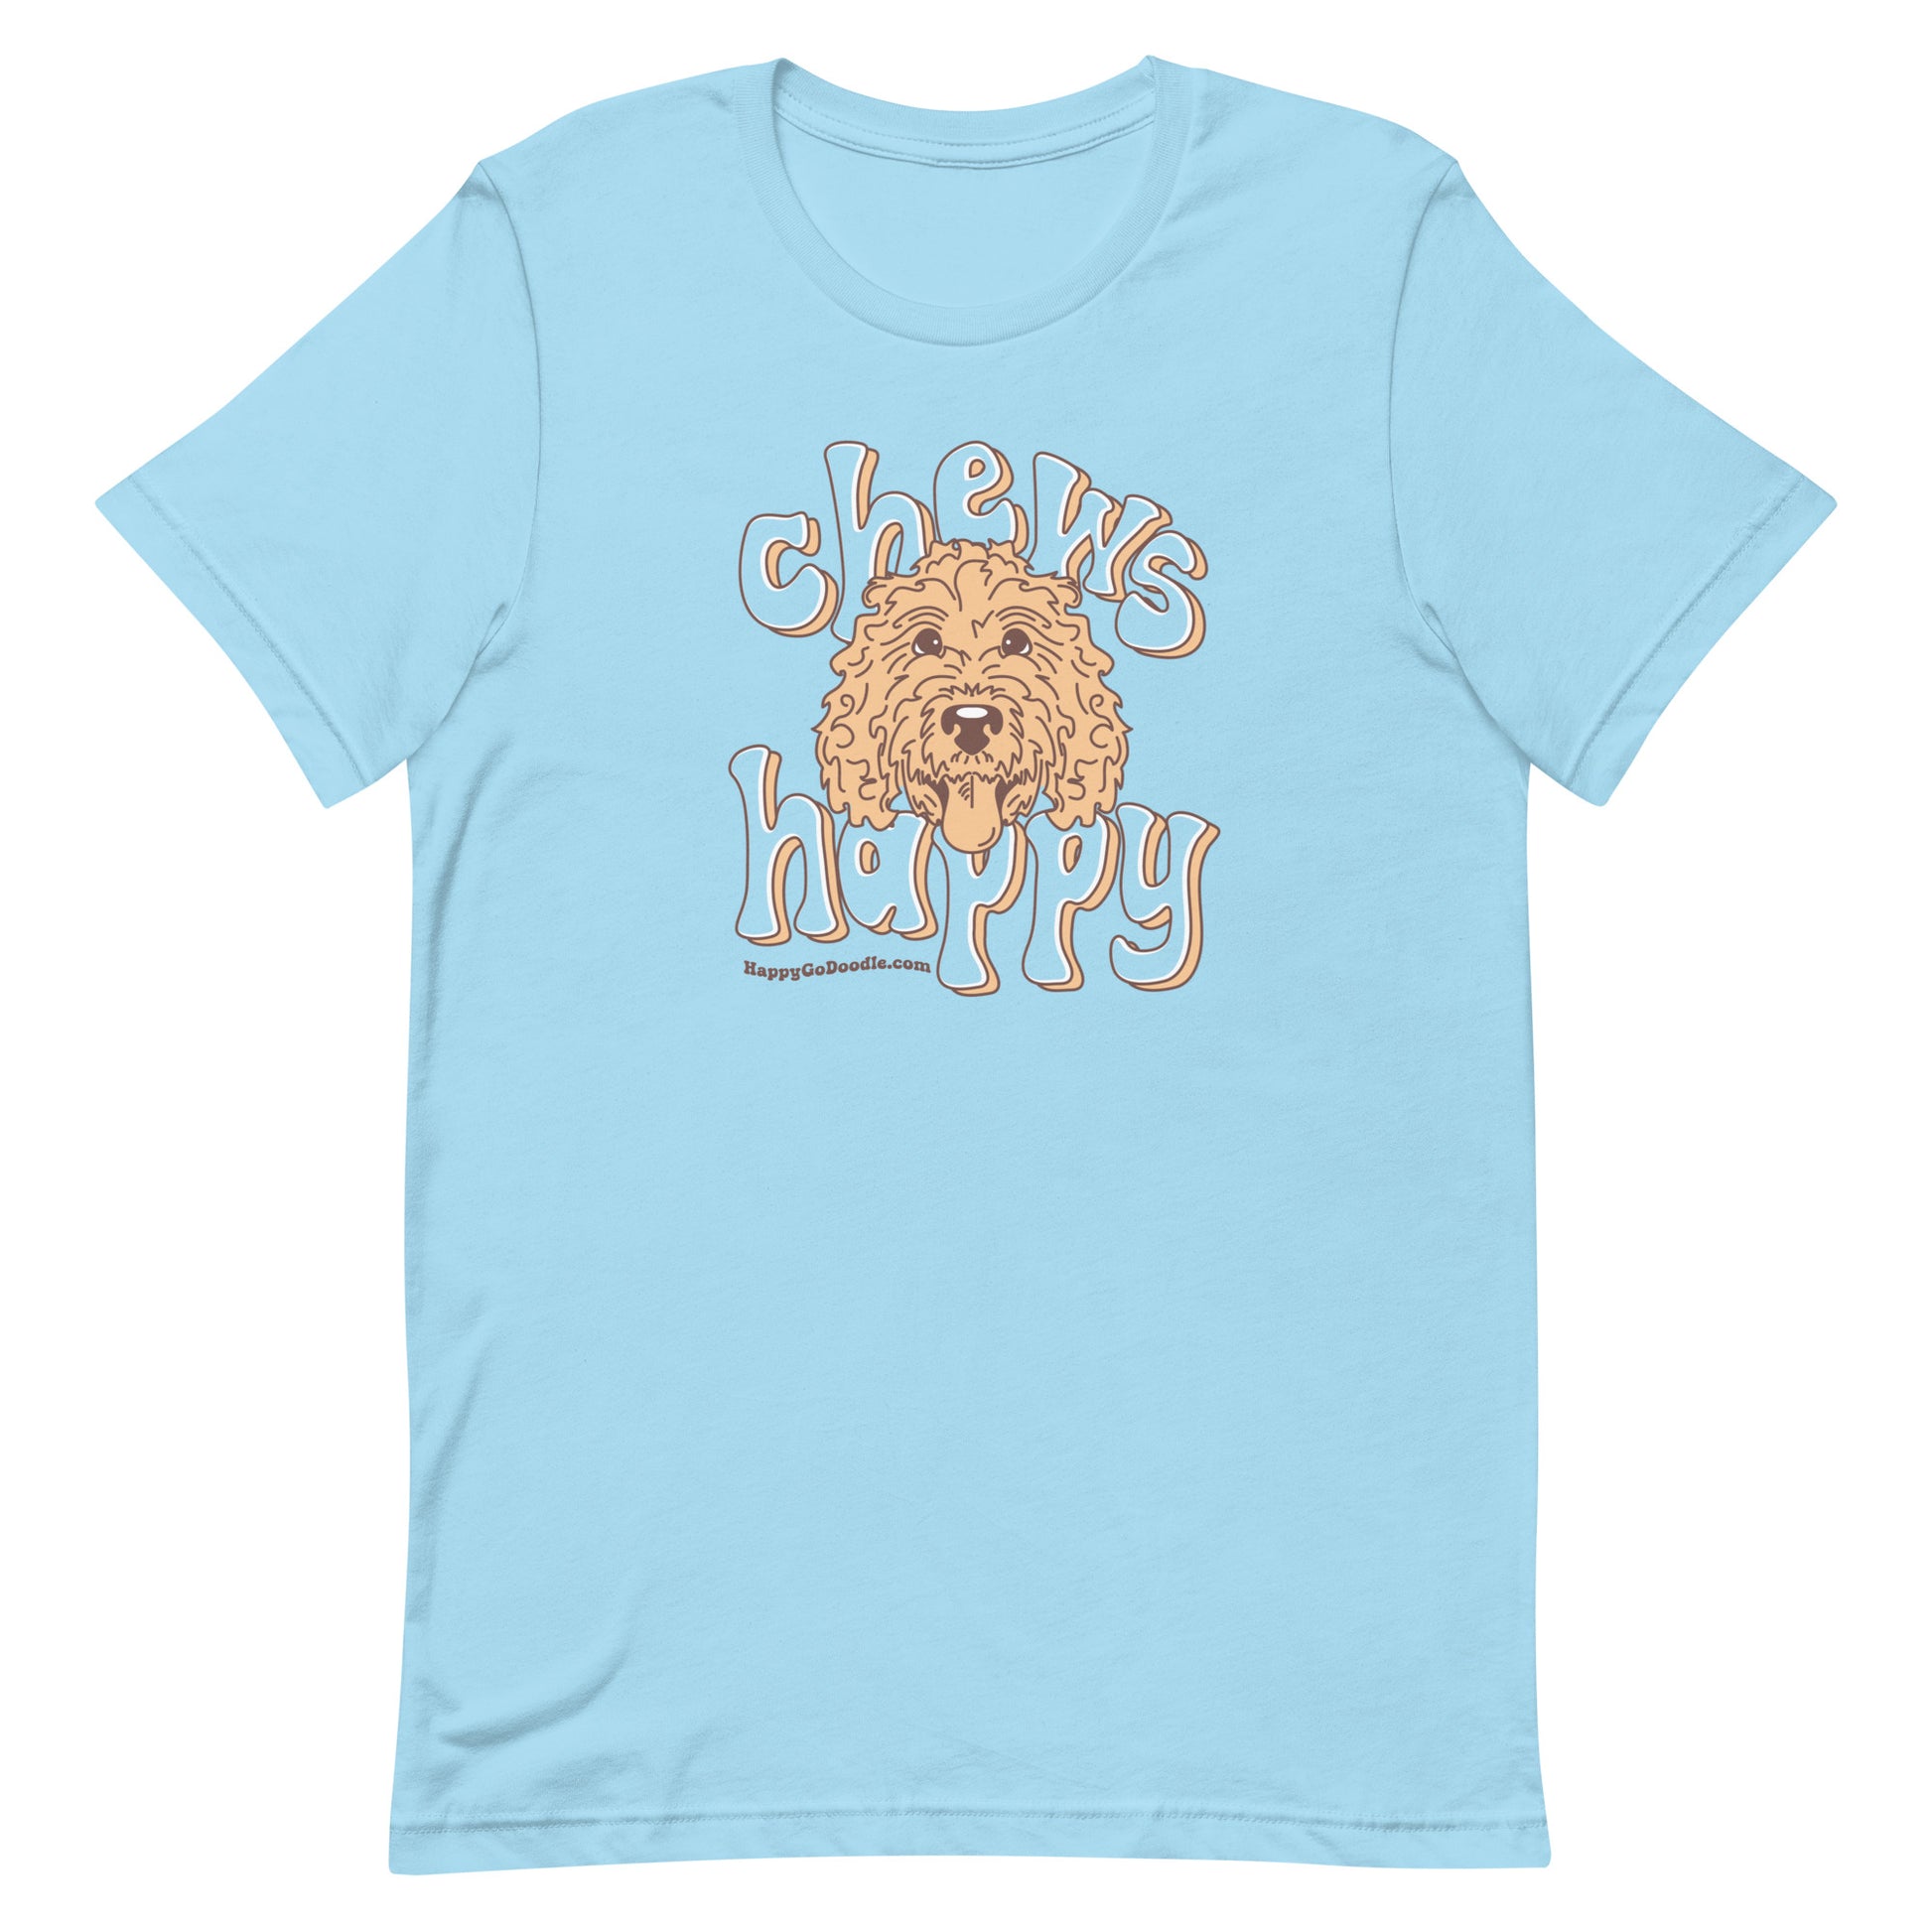 Goldendoodle crew neck sweatshirt with Goldendoodle face and words "Chews Happy" in ocean blue color